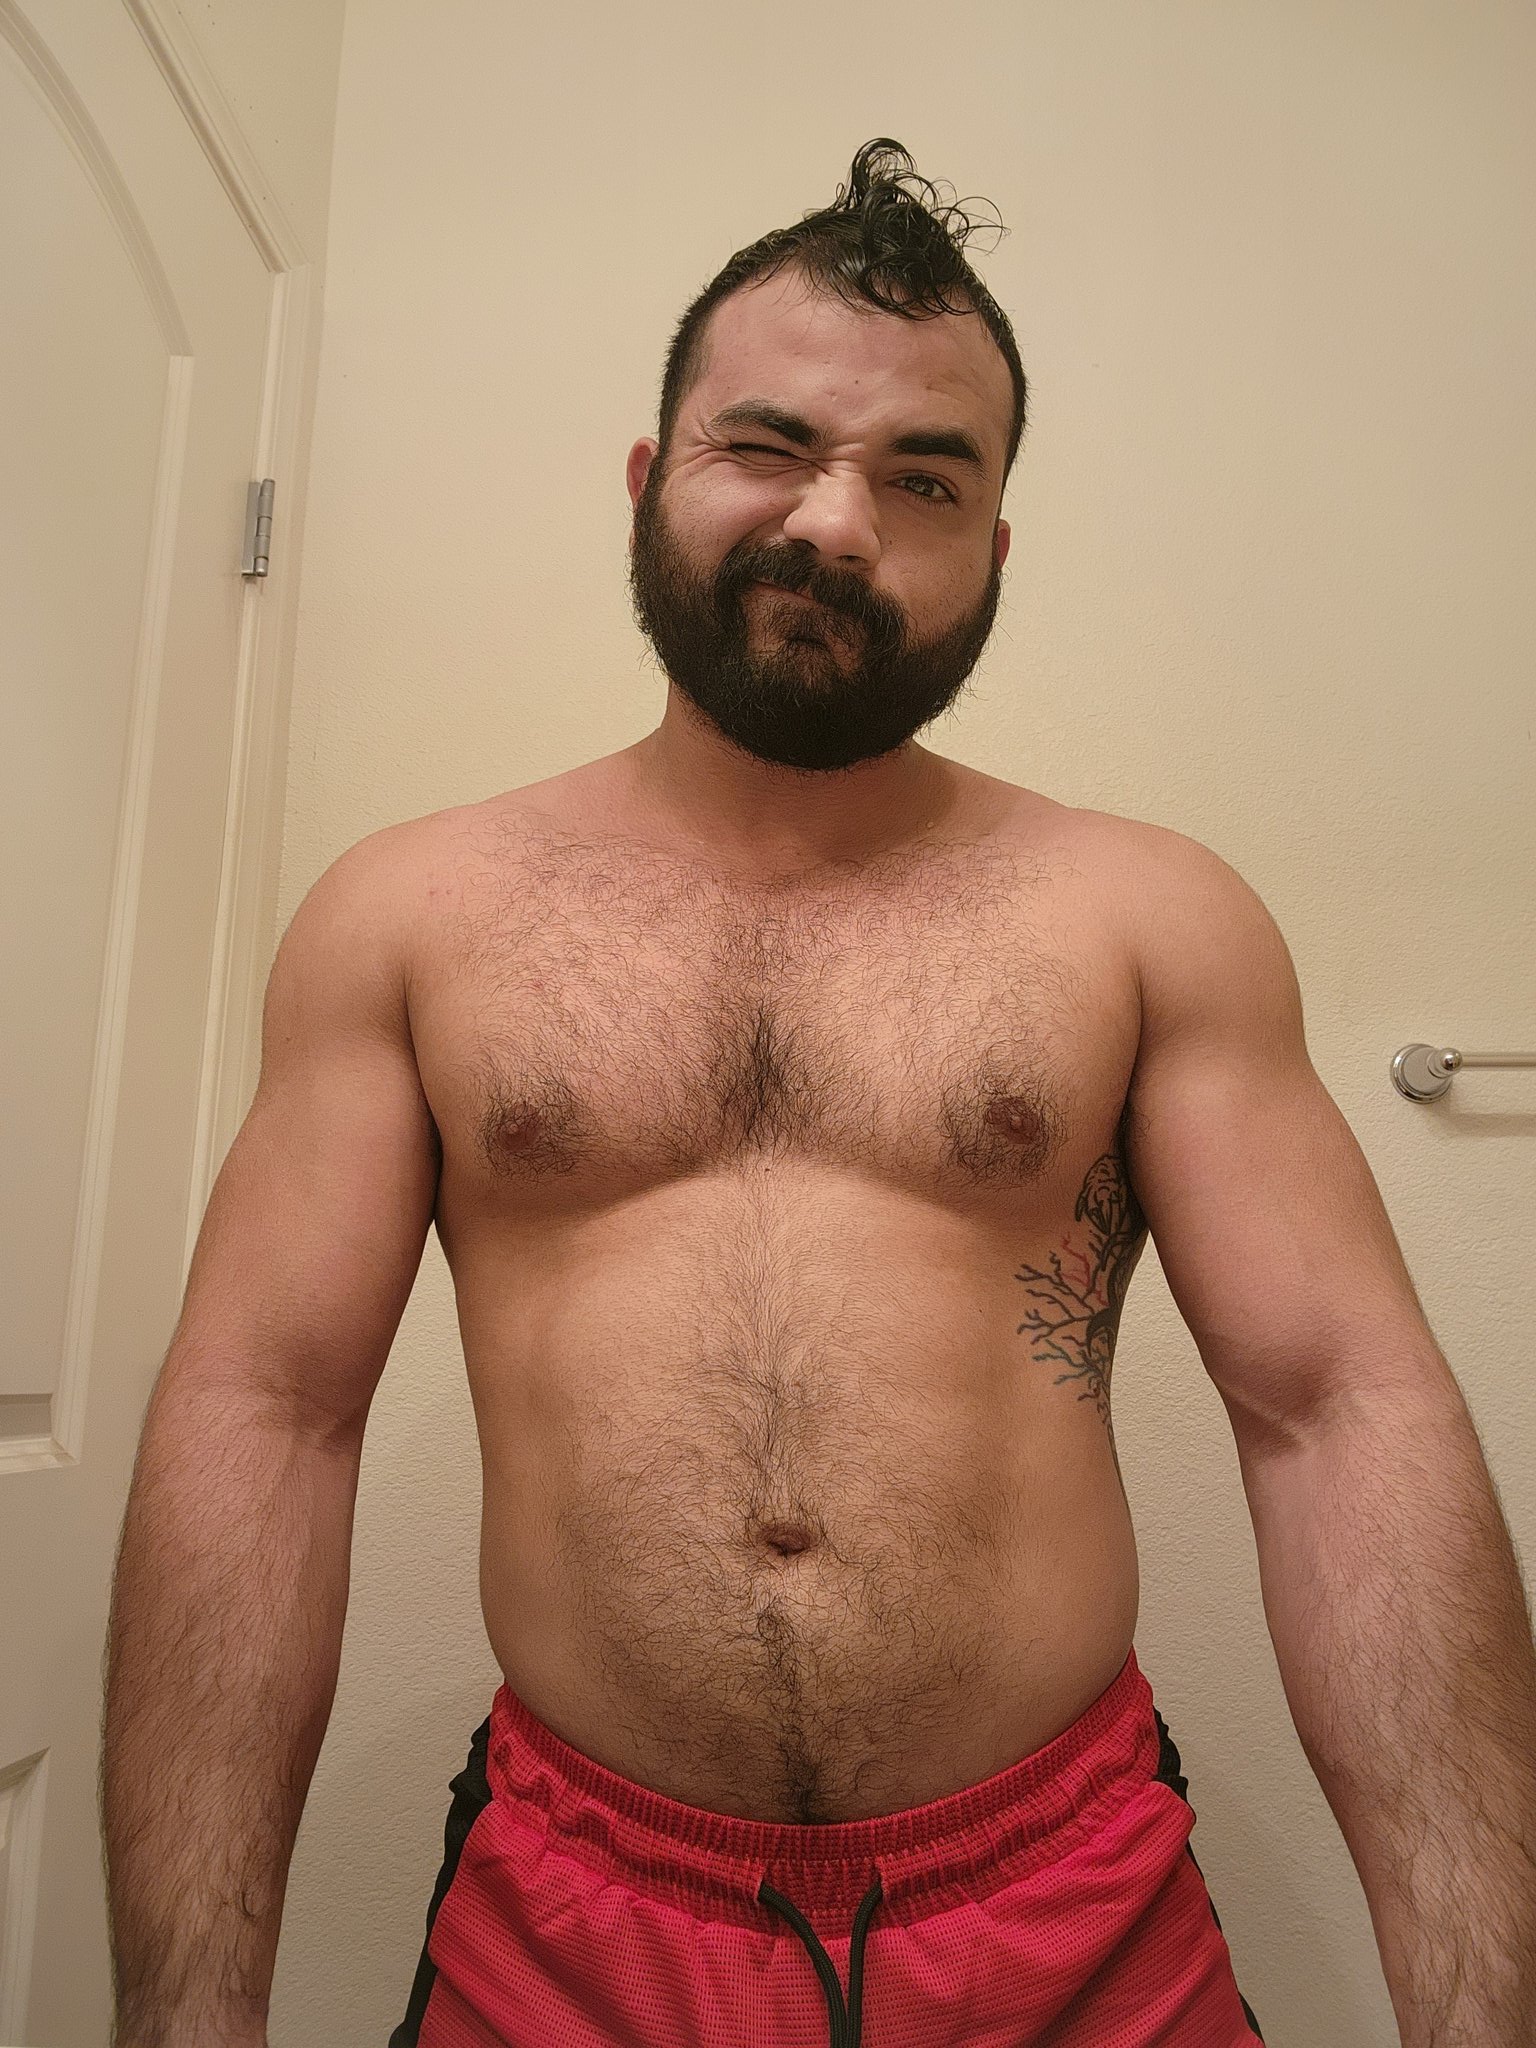 LorMat on X: The bloat is real #beef #beard #gay #cellblock13  t.convPZJtVq6D  X